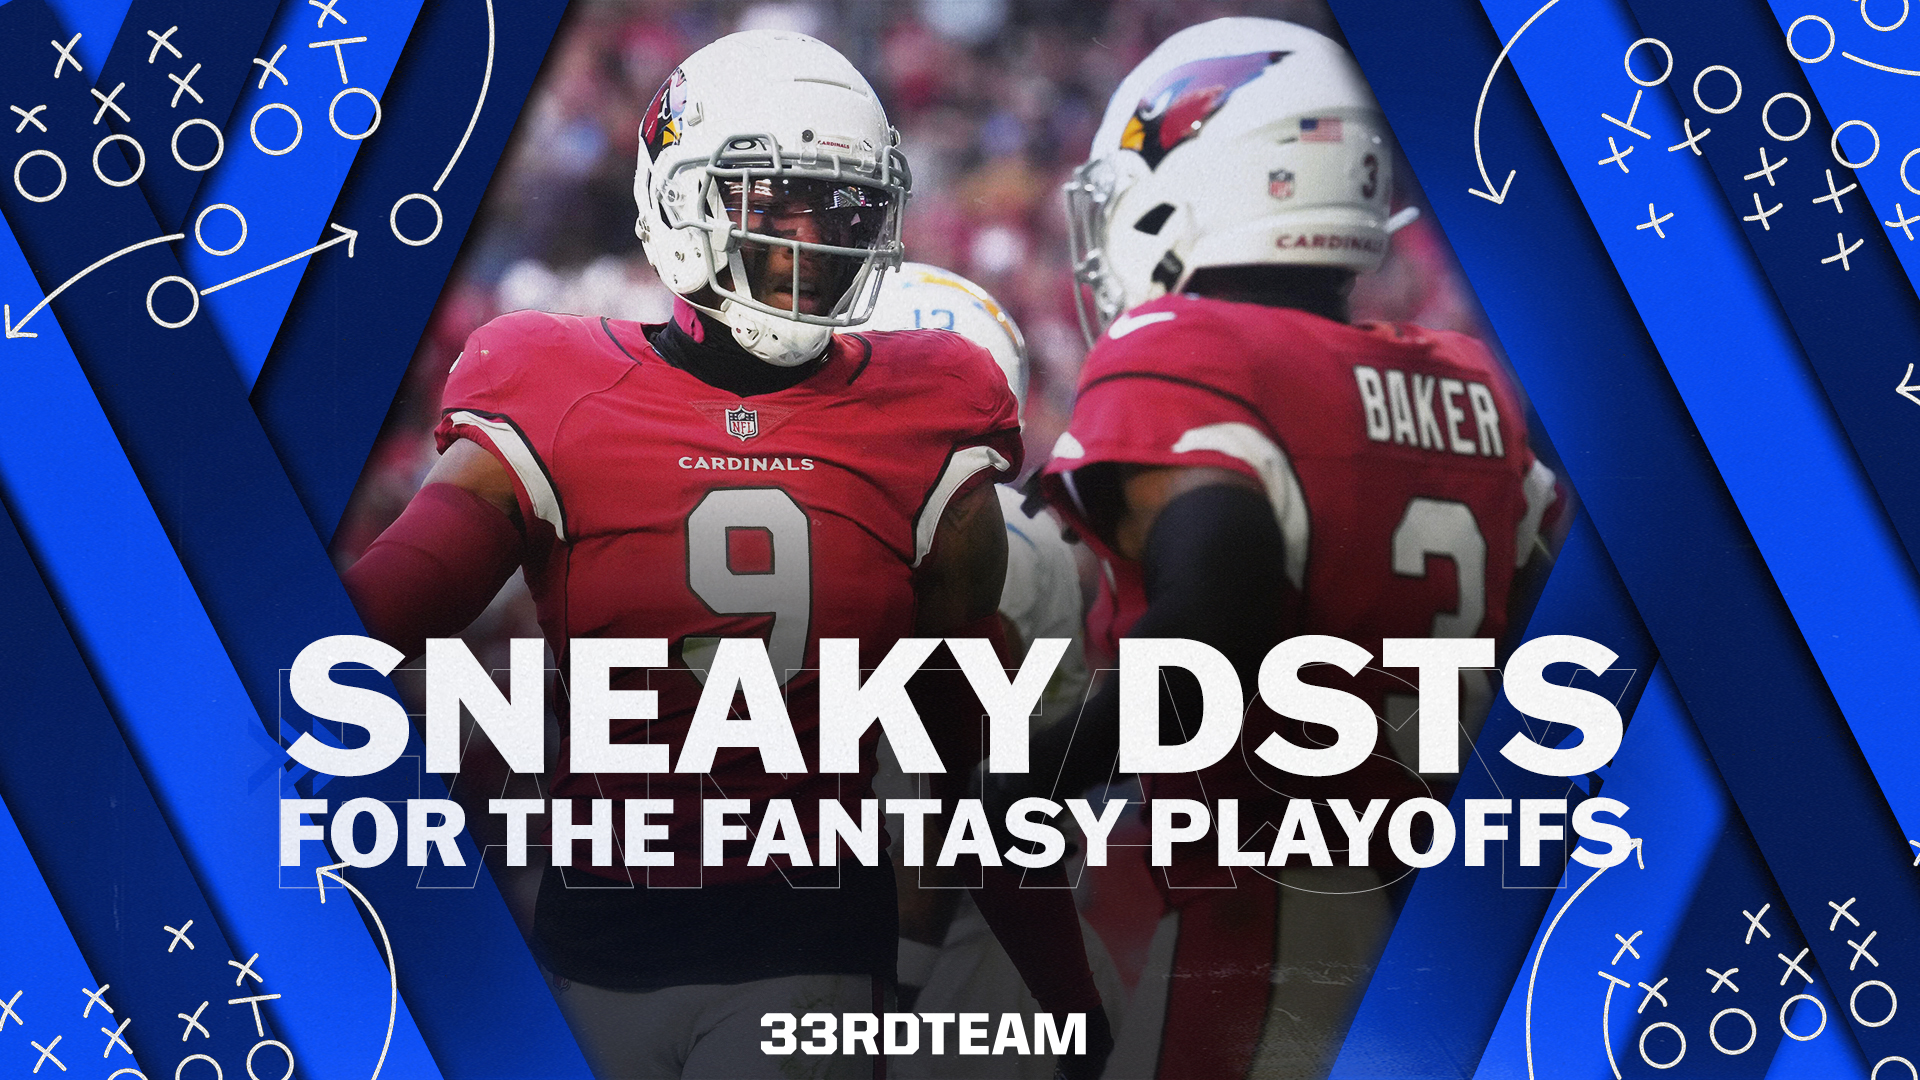 dsts for the fantasy playoffs